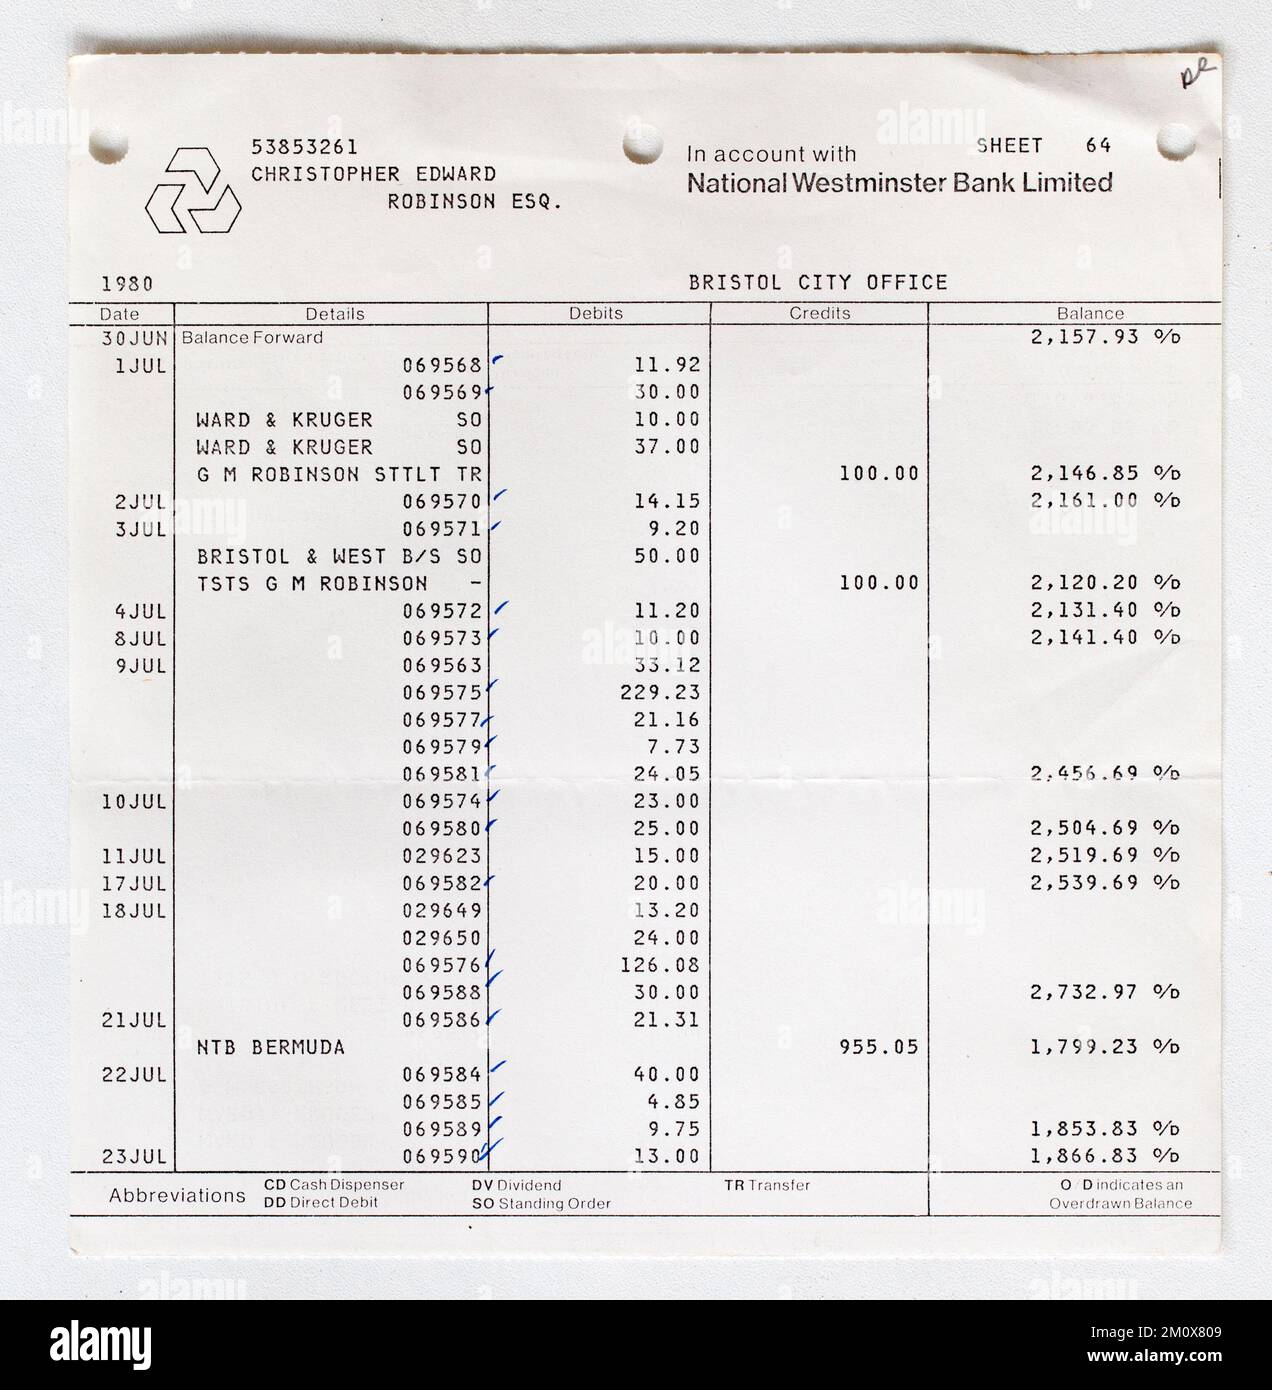 1980s British Bank Account Statement - National Westminster Bank Stock Photo